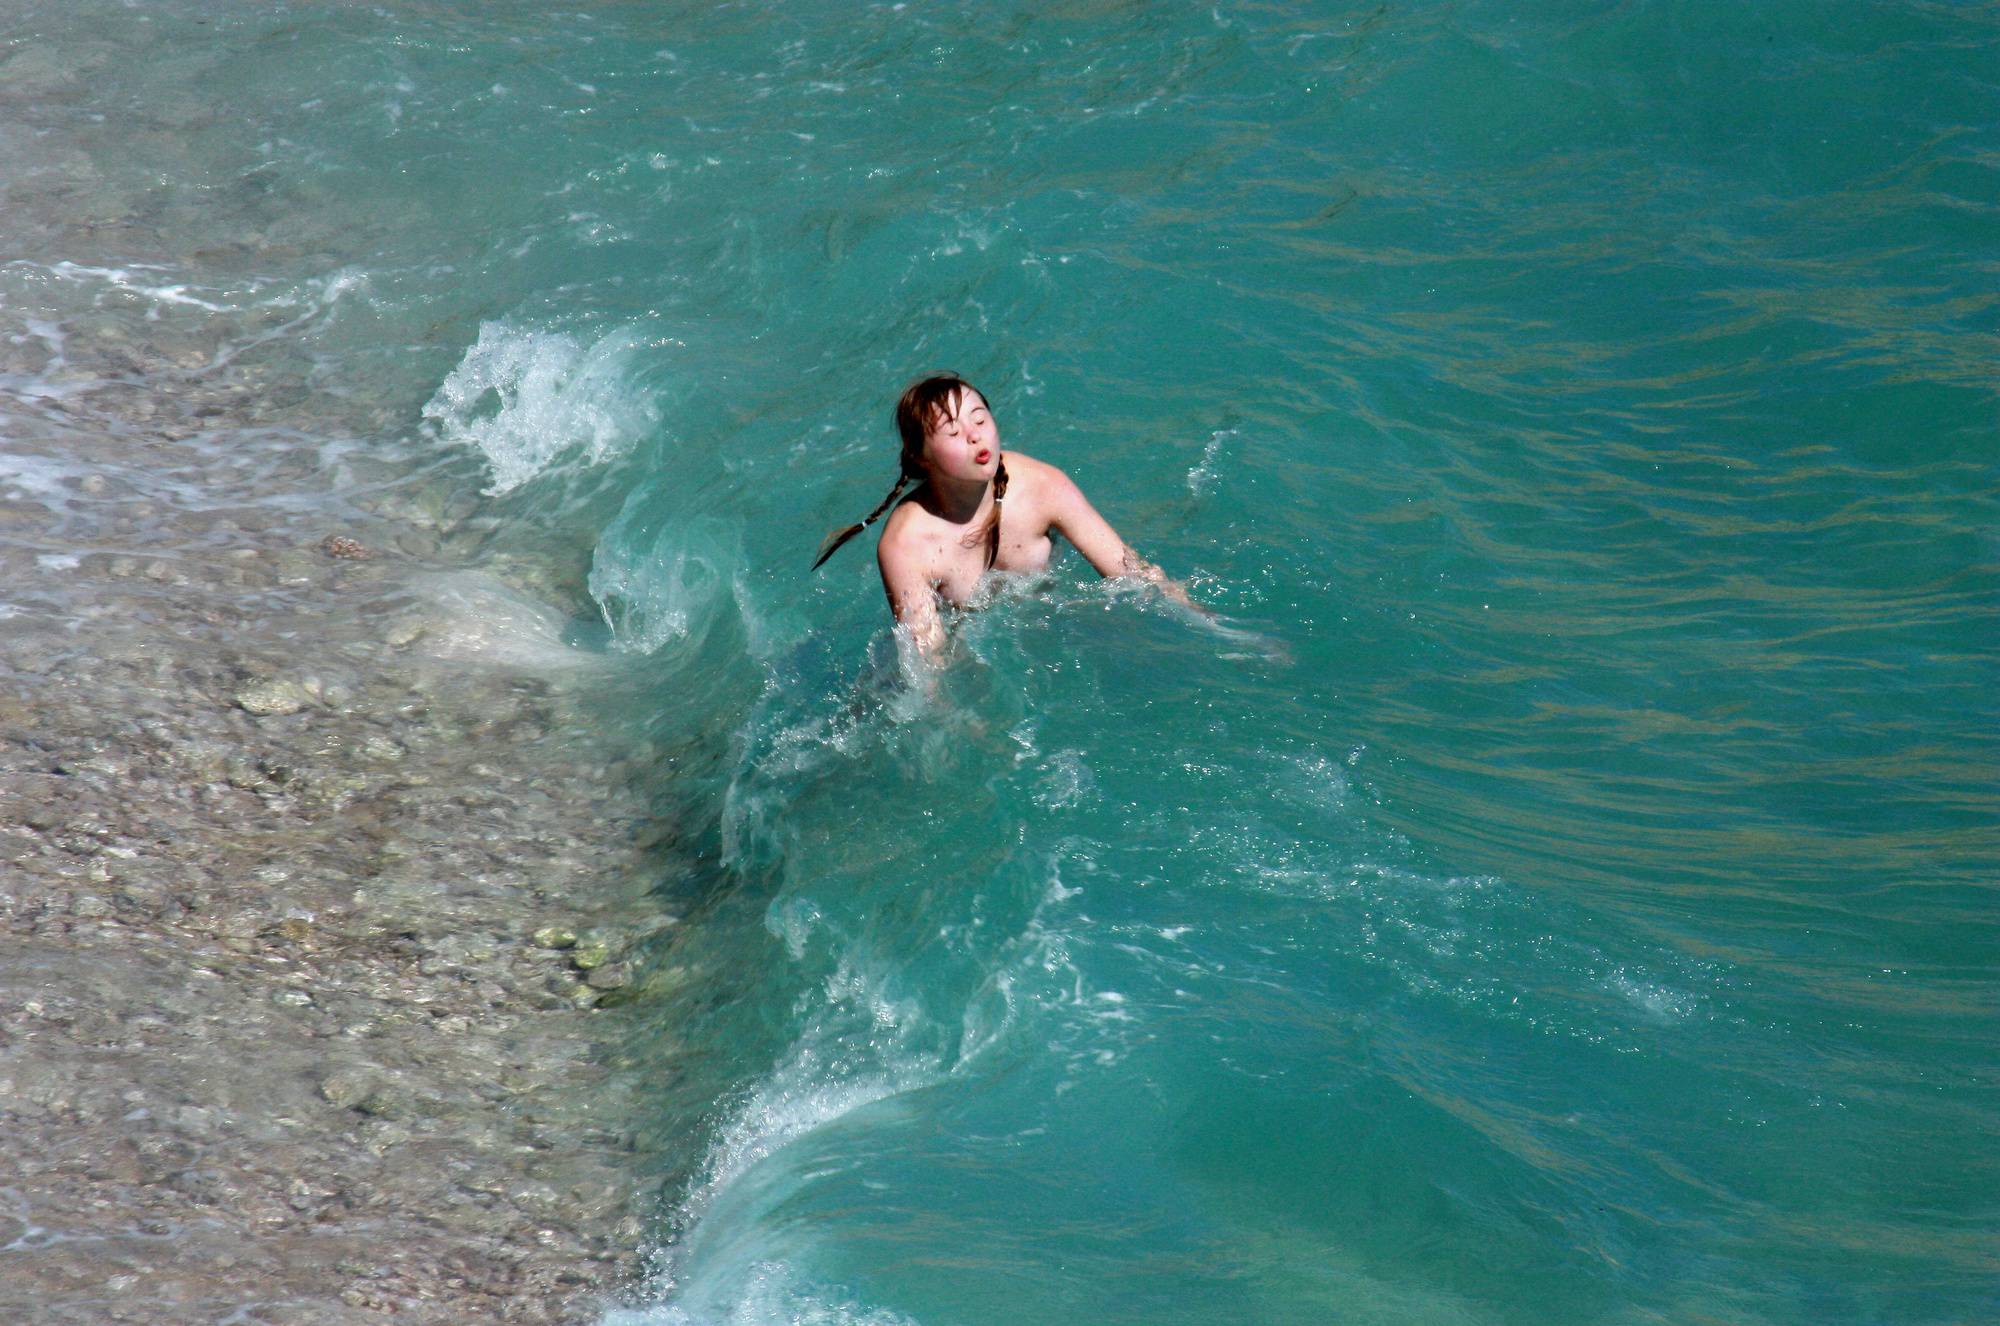 Naturist Cold Water Entry - 1